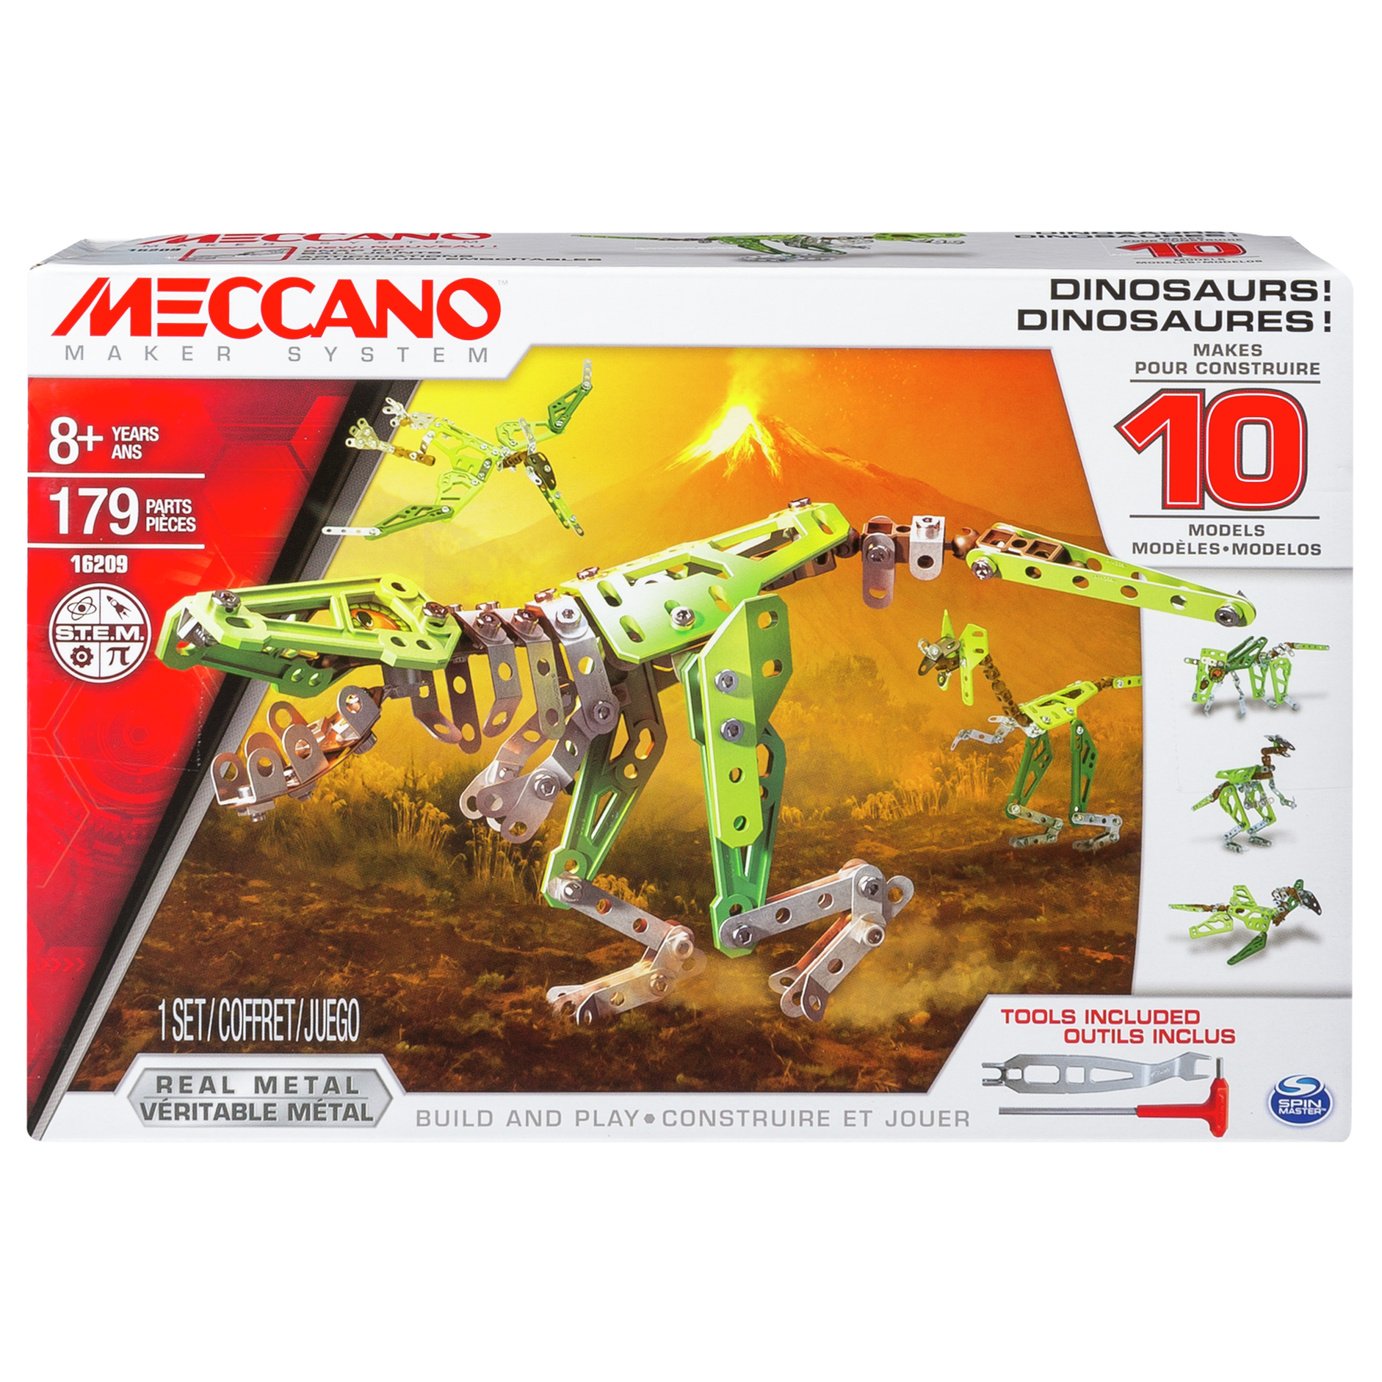 meccano for 10 year olds